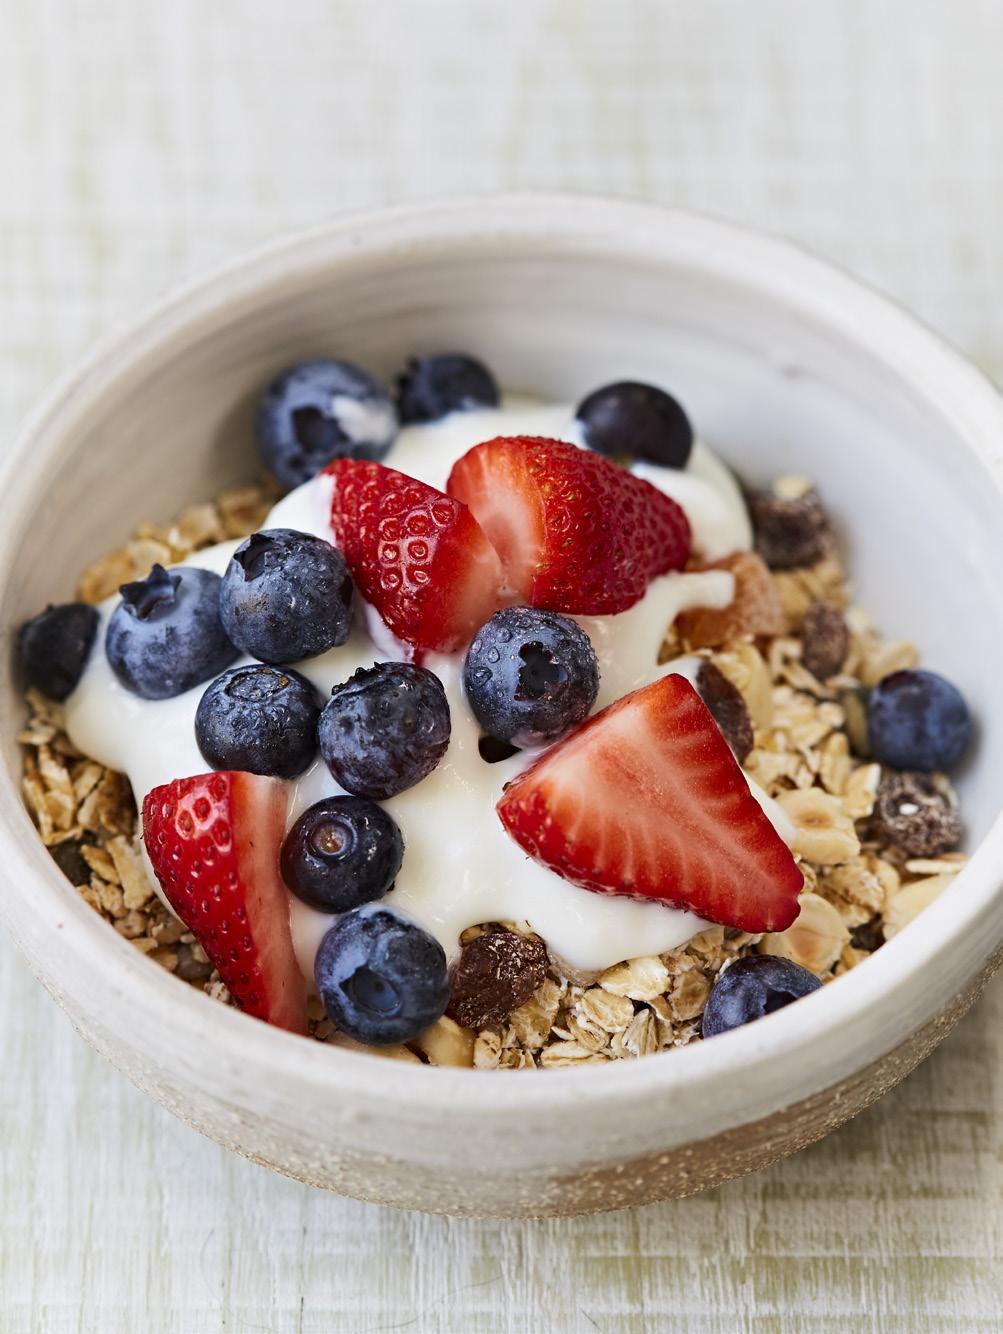 LESSON PLAN: DIY OATY FRUITY CEREAL LEARNING INTENTIONS: To understand why breakfast is important To explore how much sugar can be found in popular breakfast cereal To make DIY oaty fruity cereal or